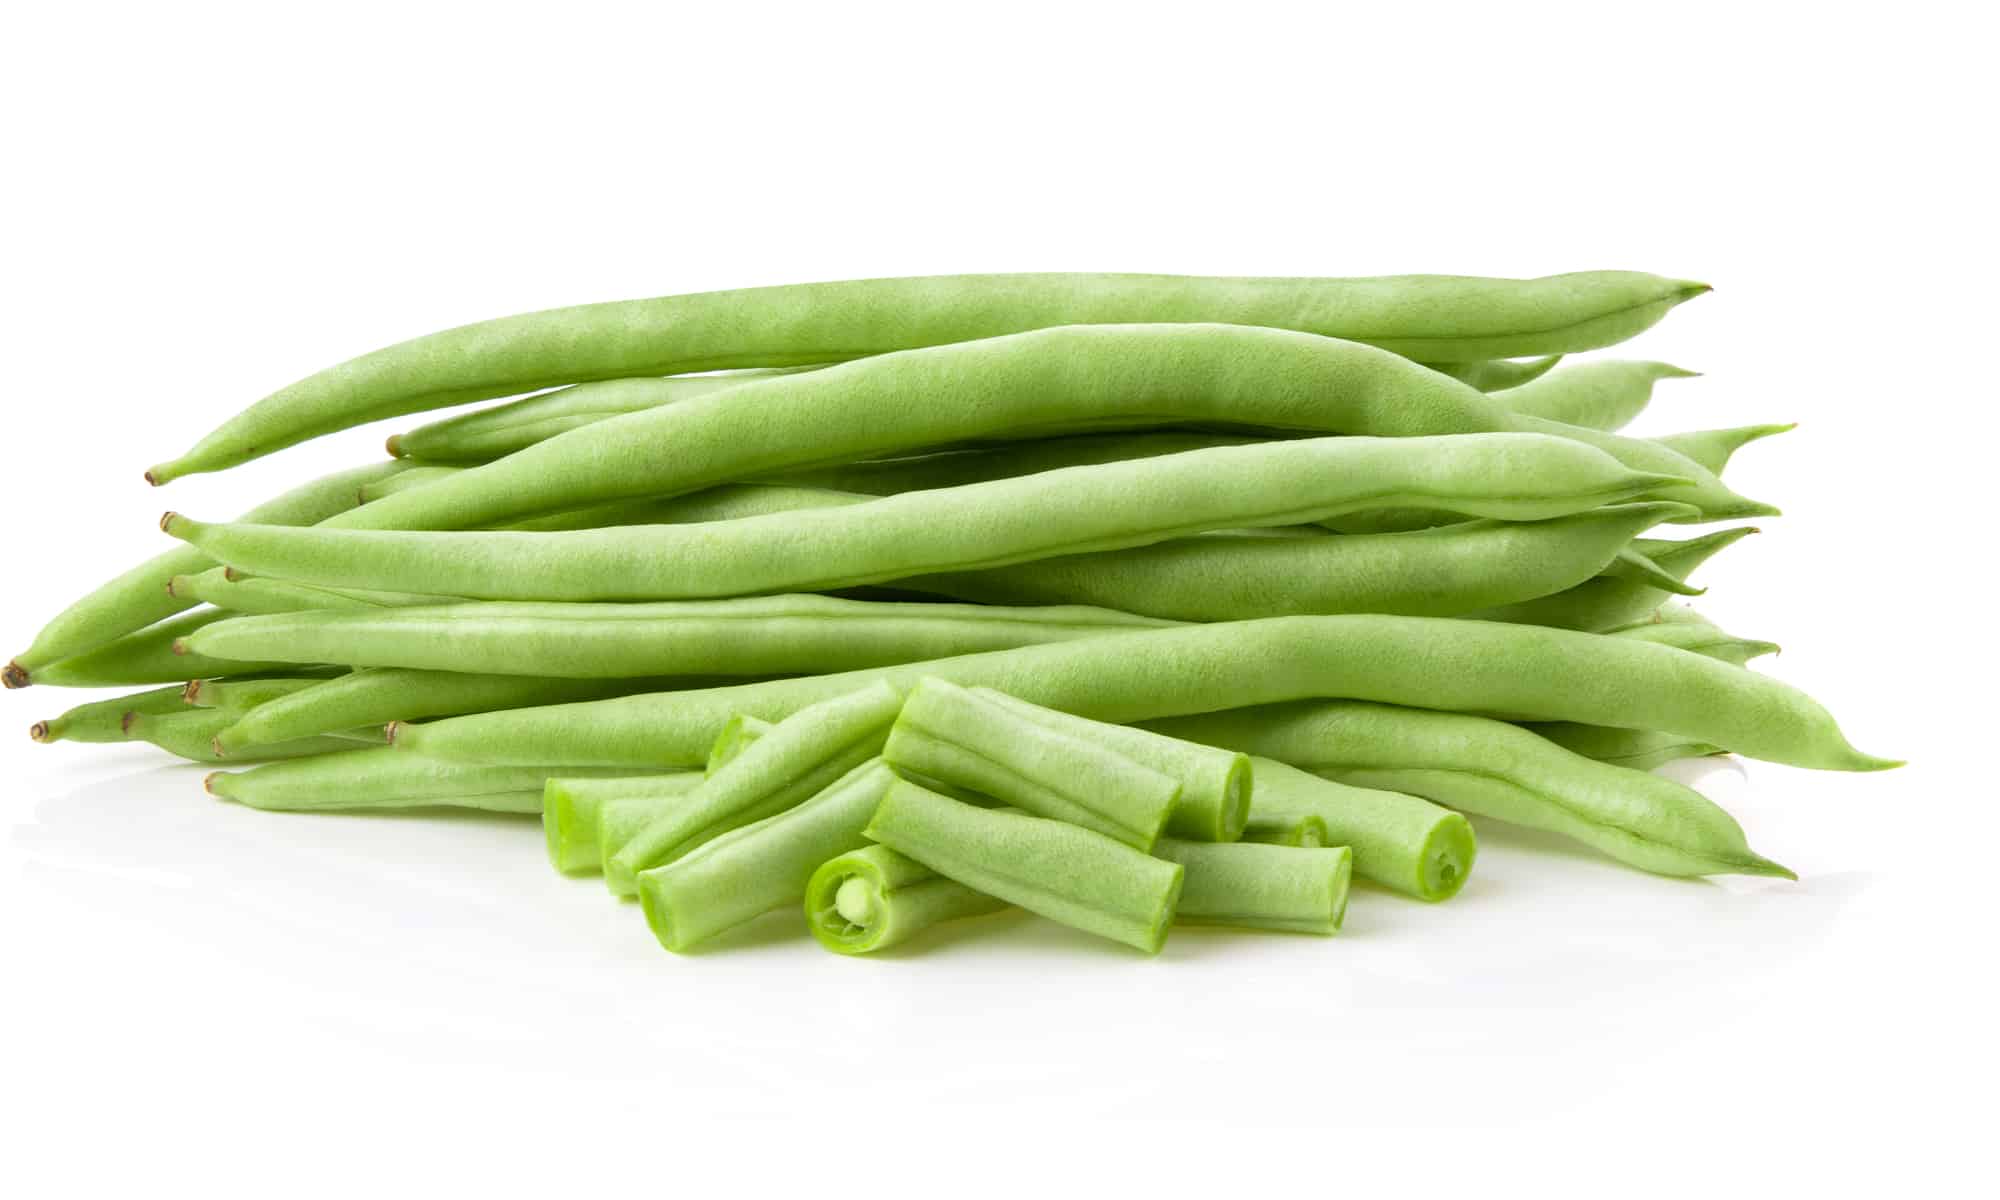 Raw green beans on white background